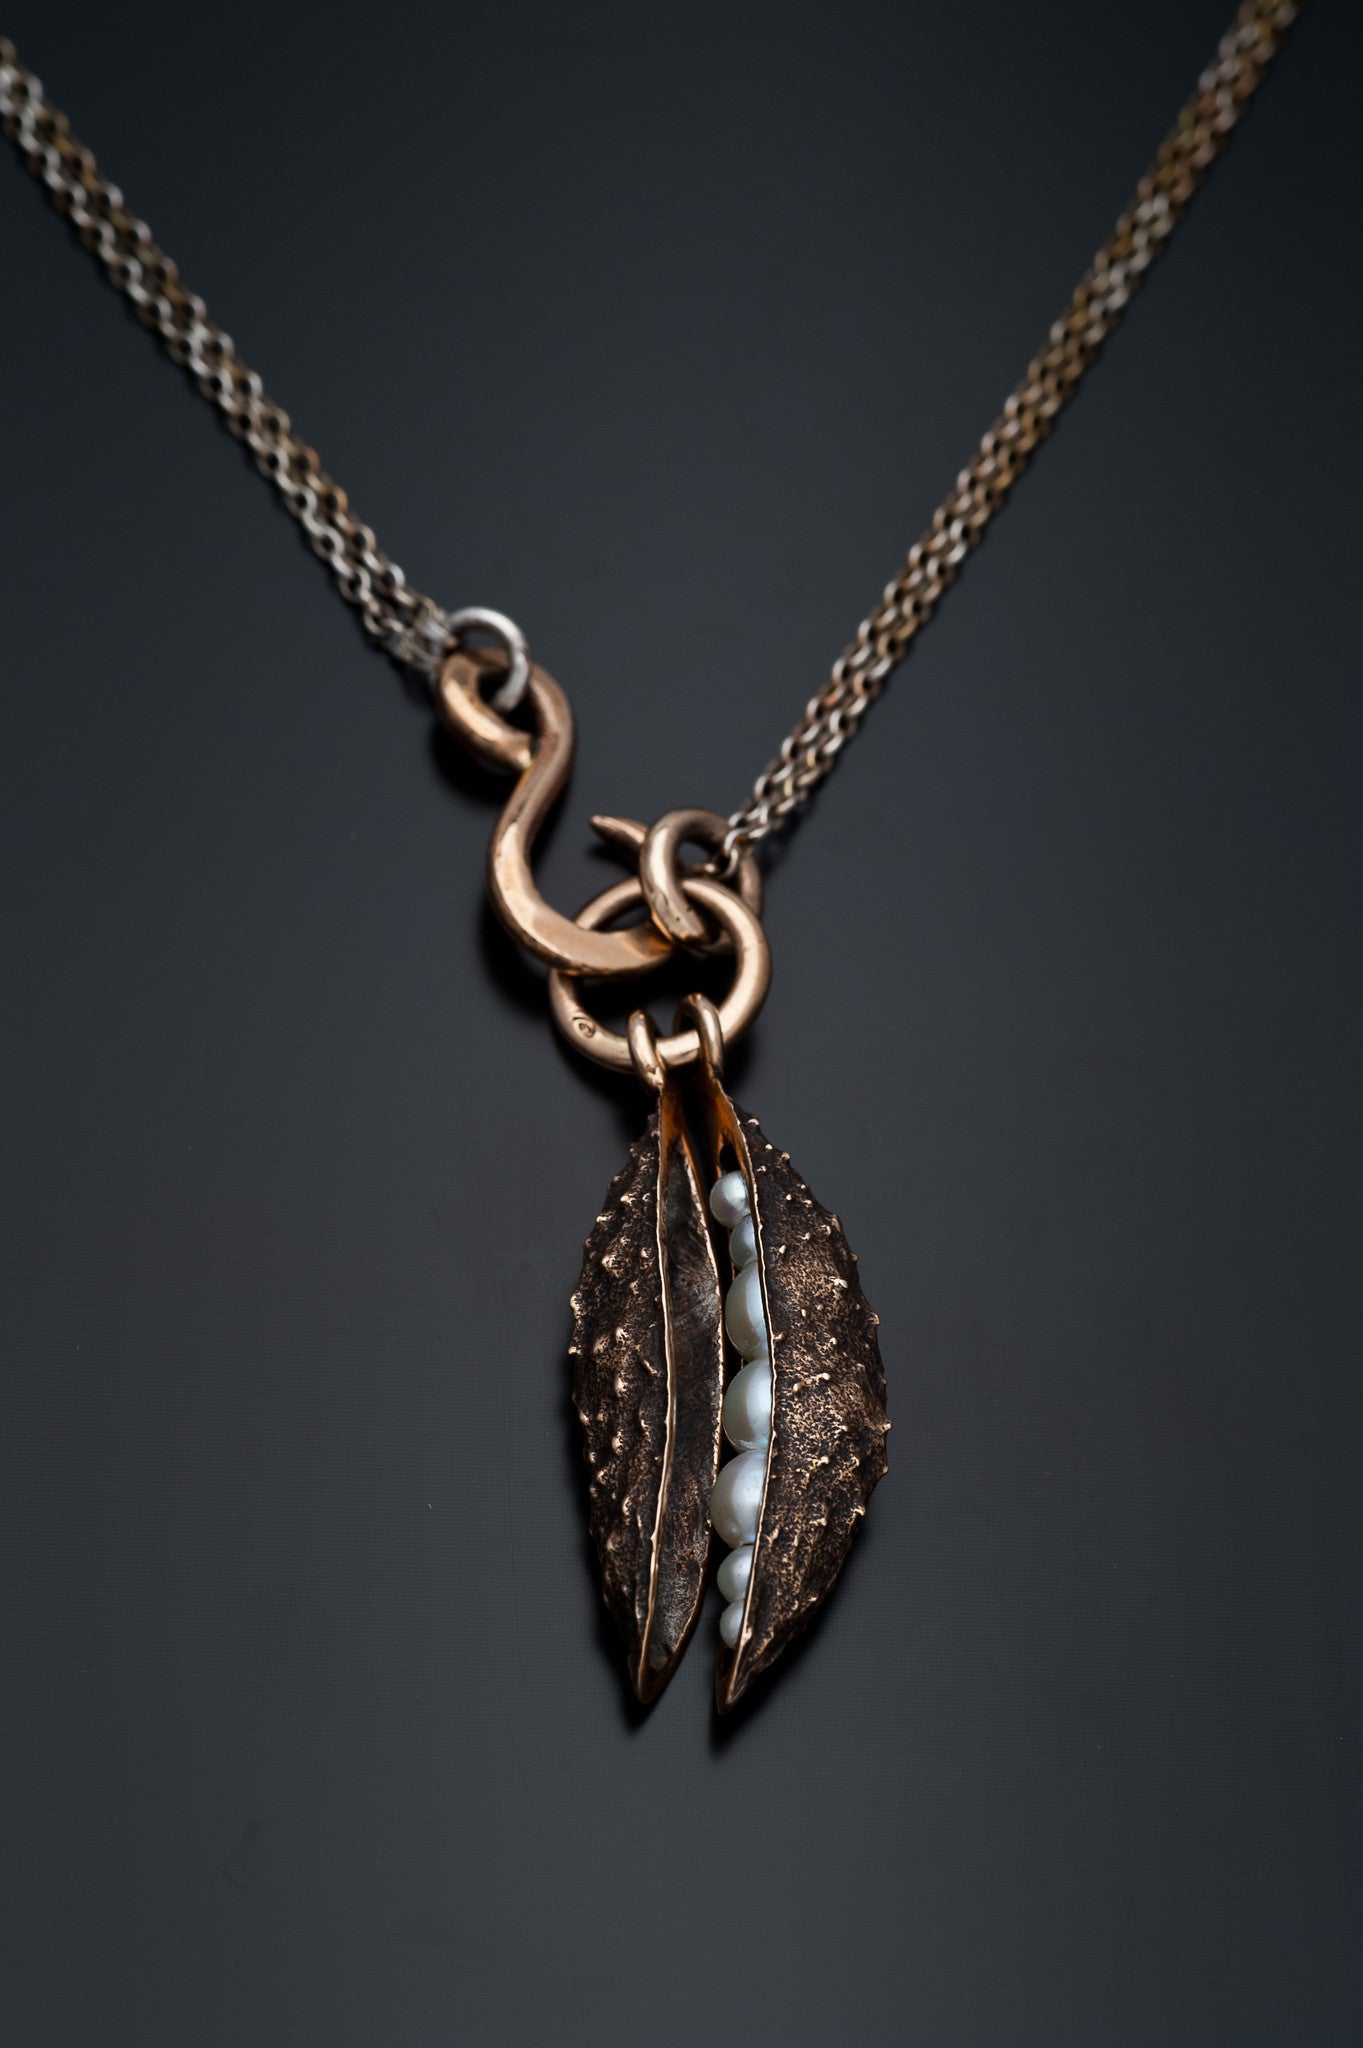 Juvelisto Design Bronze African Pod Pendant with Freshwater Pearls